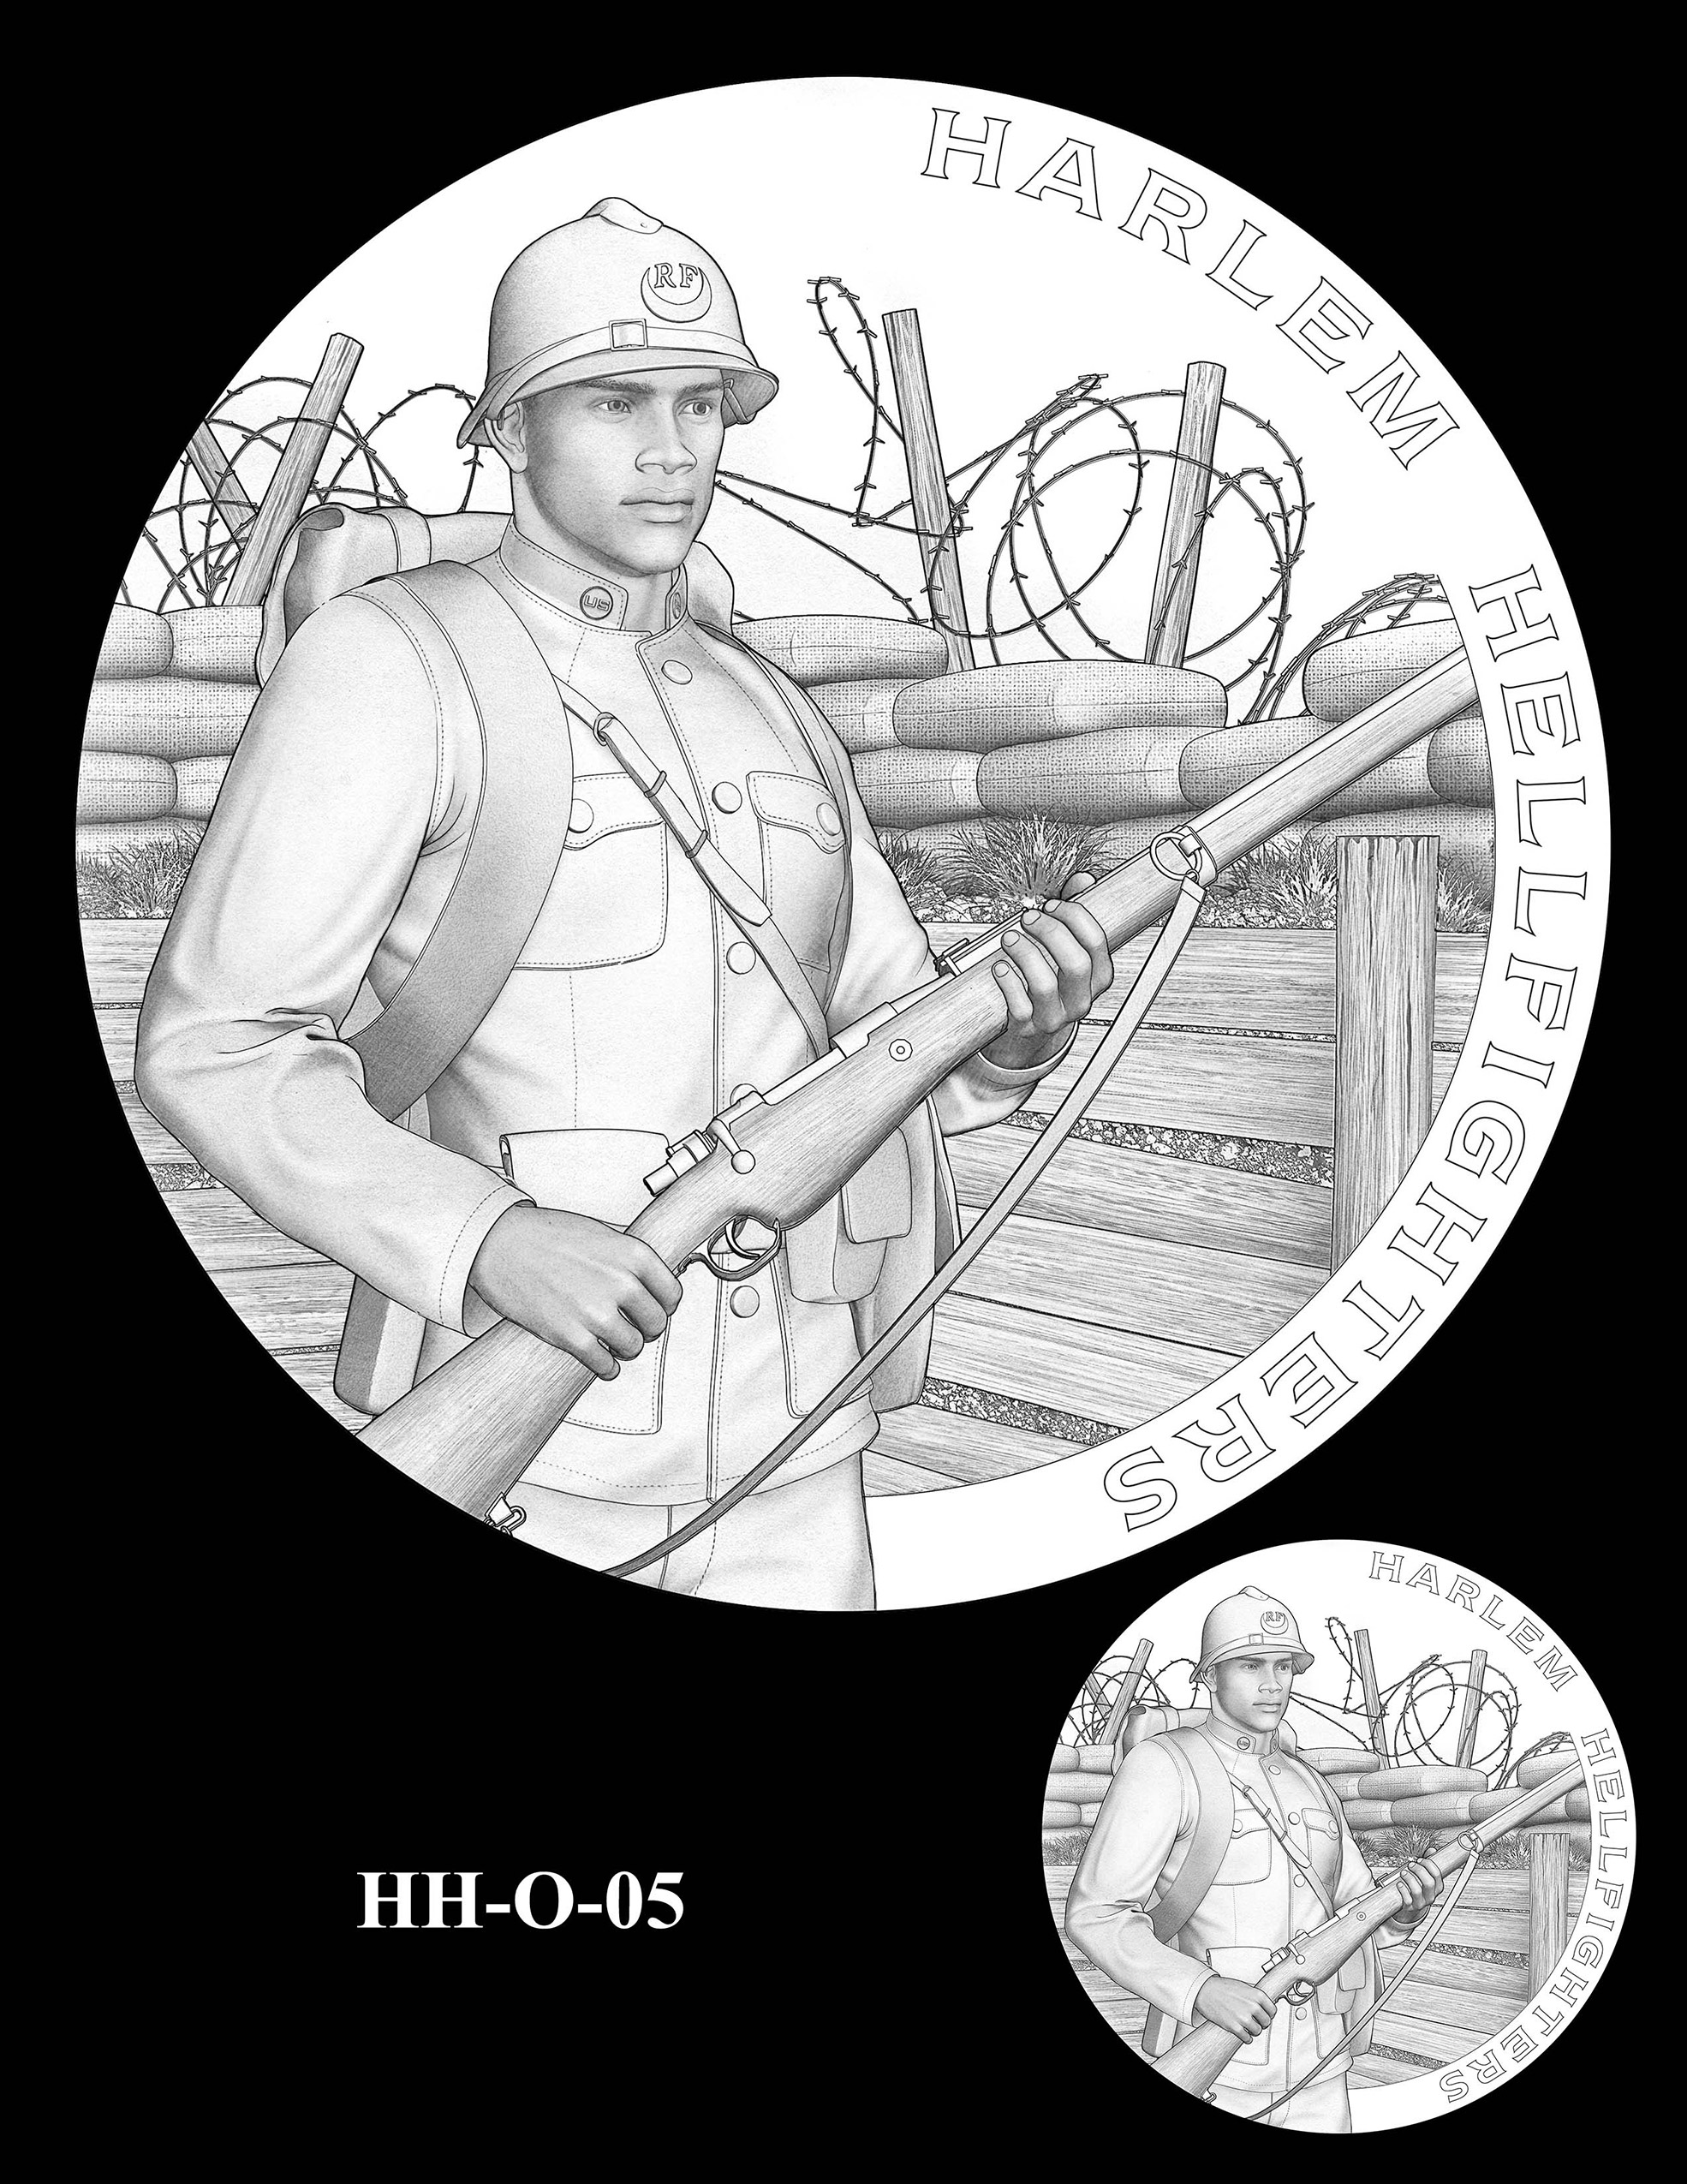 HH-O-05 -- Harlem Hellfighters Congressional Gold Medal